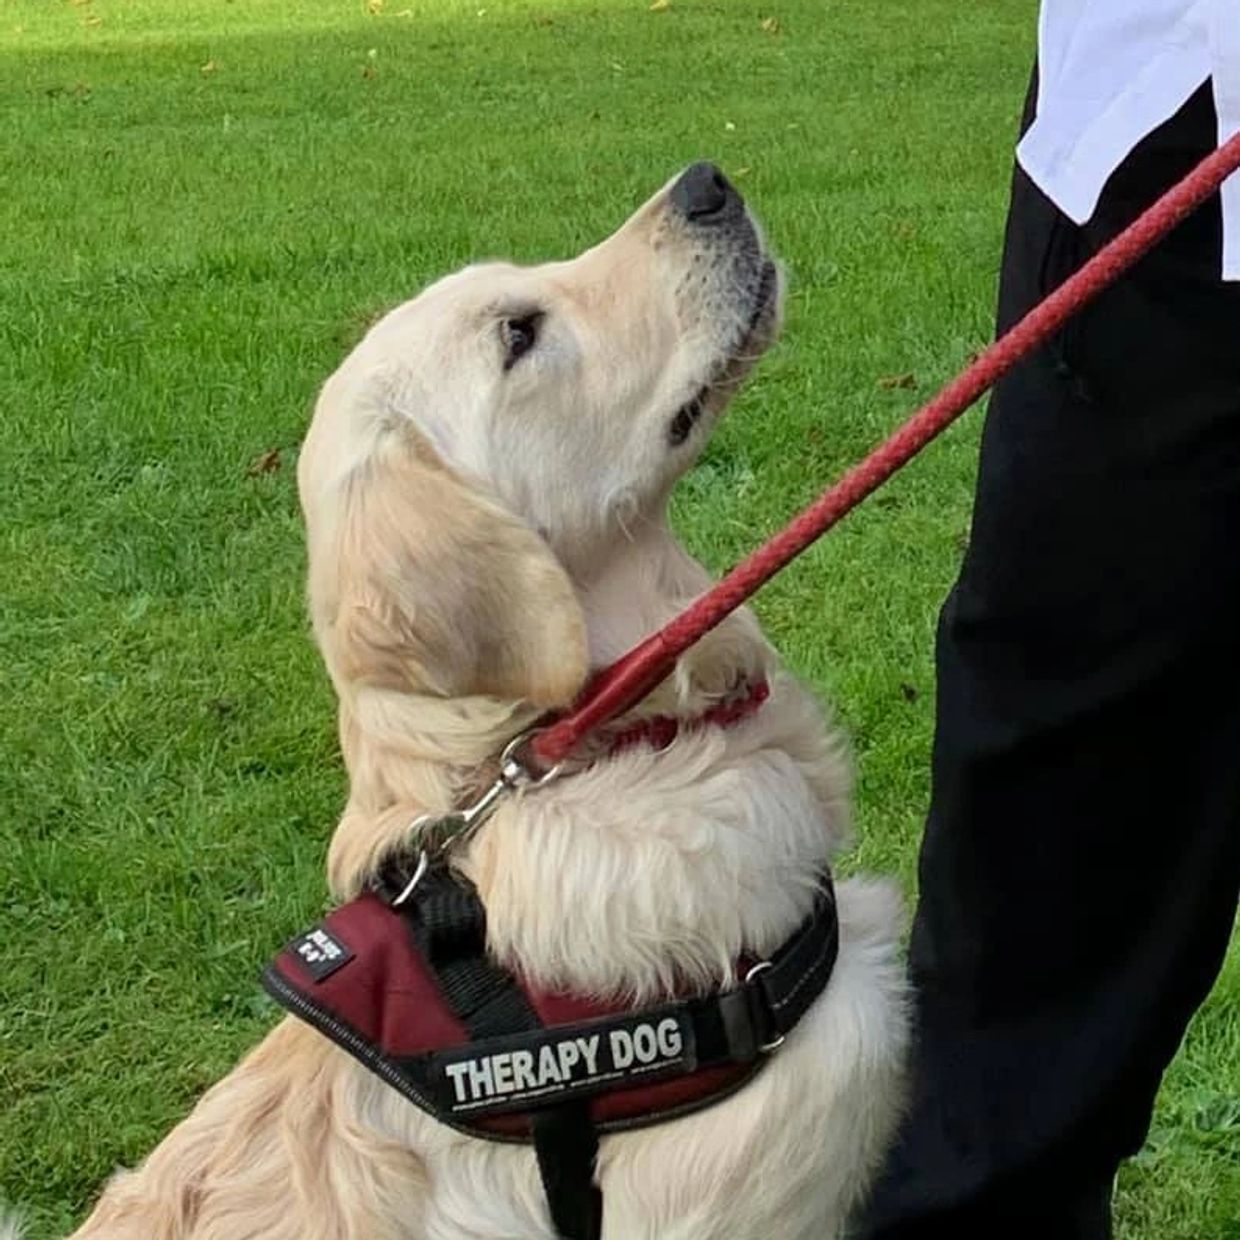 Baxter the Therapy Dog